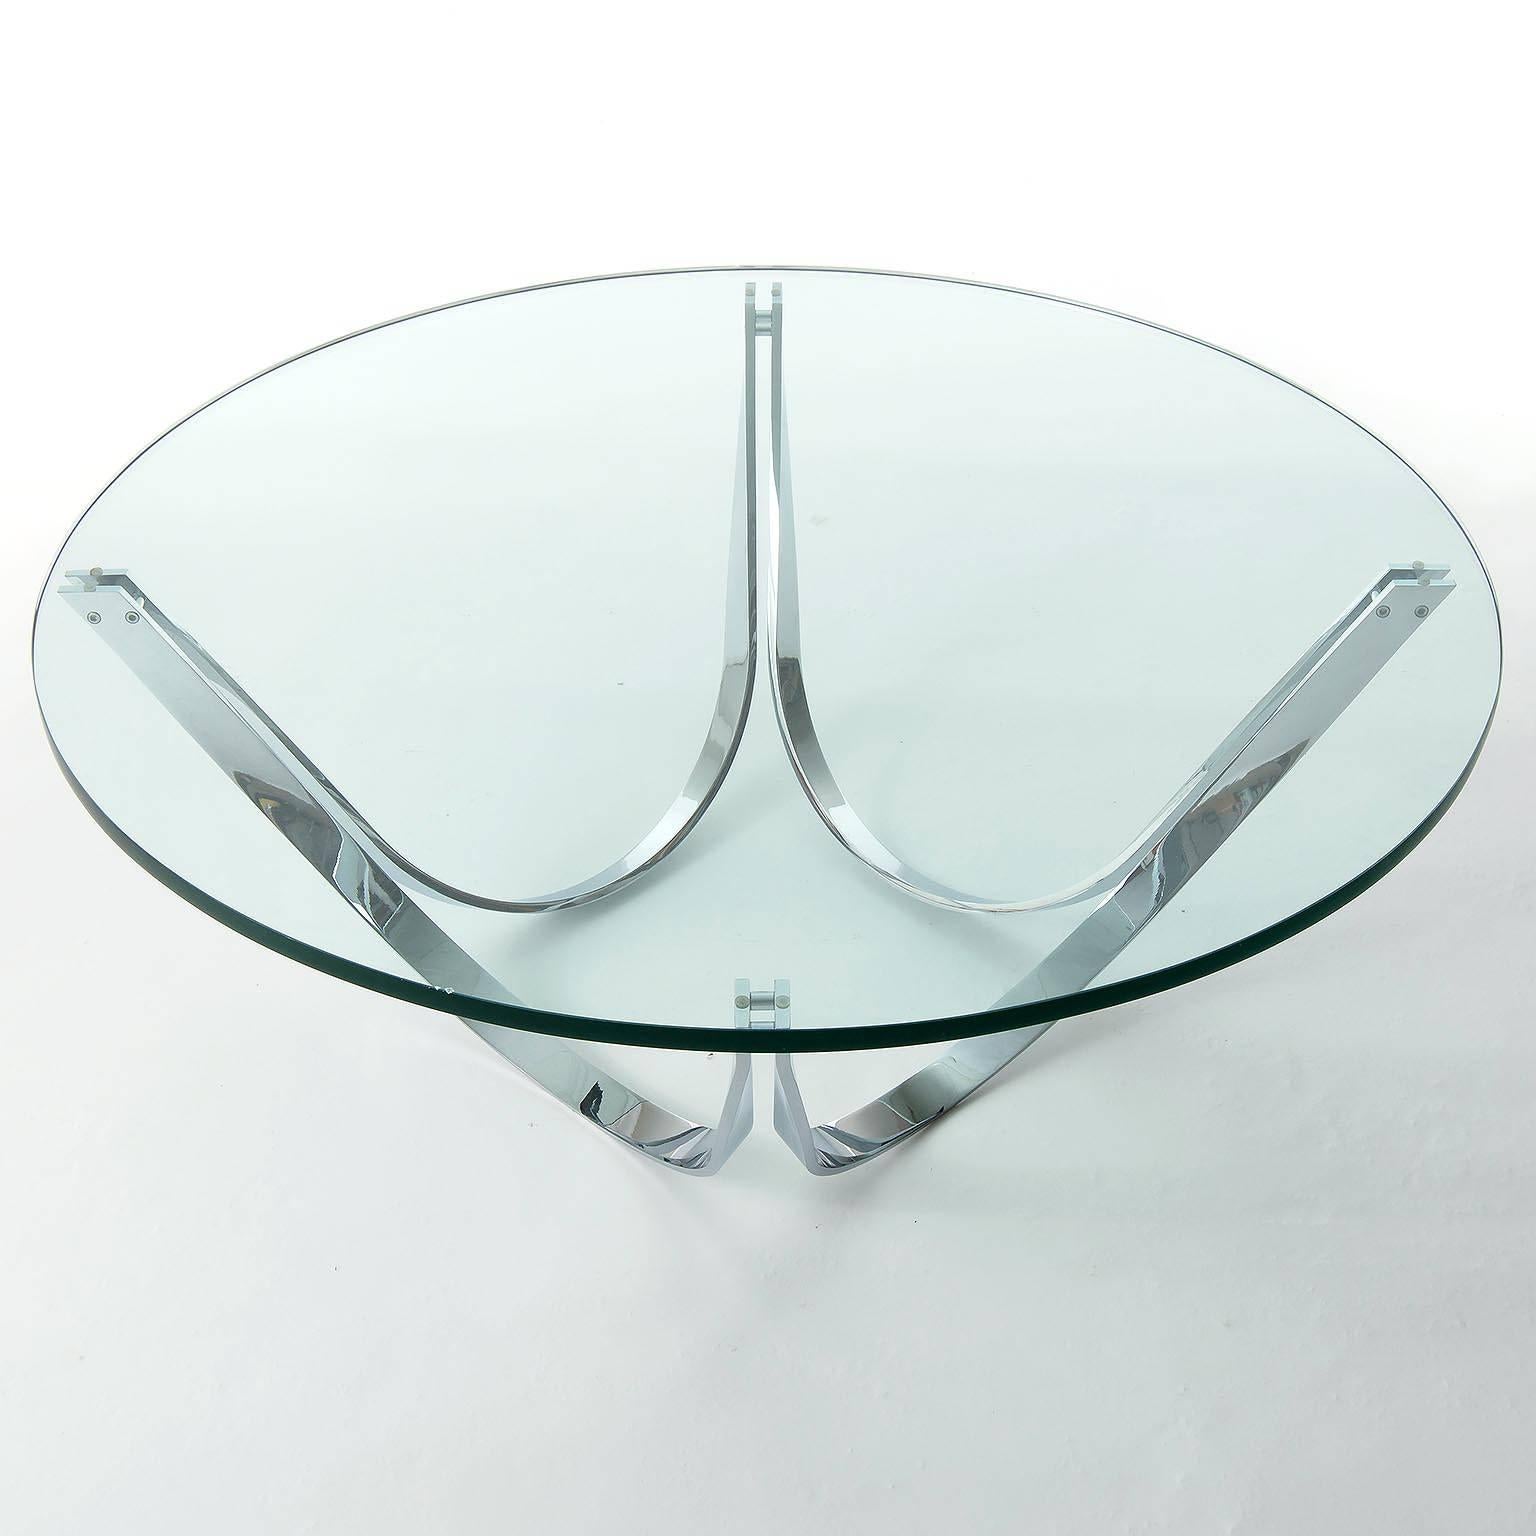 Mid-Century Modern Pair of Coffee Tables by Tri-Mark, Glass and Chrome, 1970 For Sale